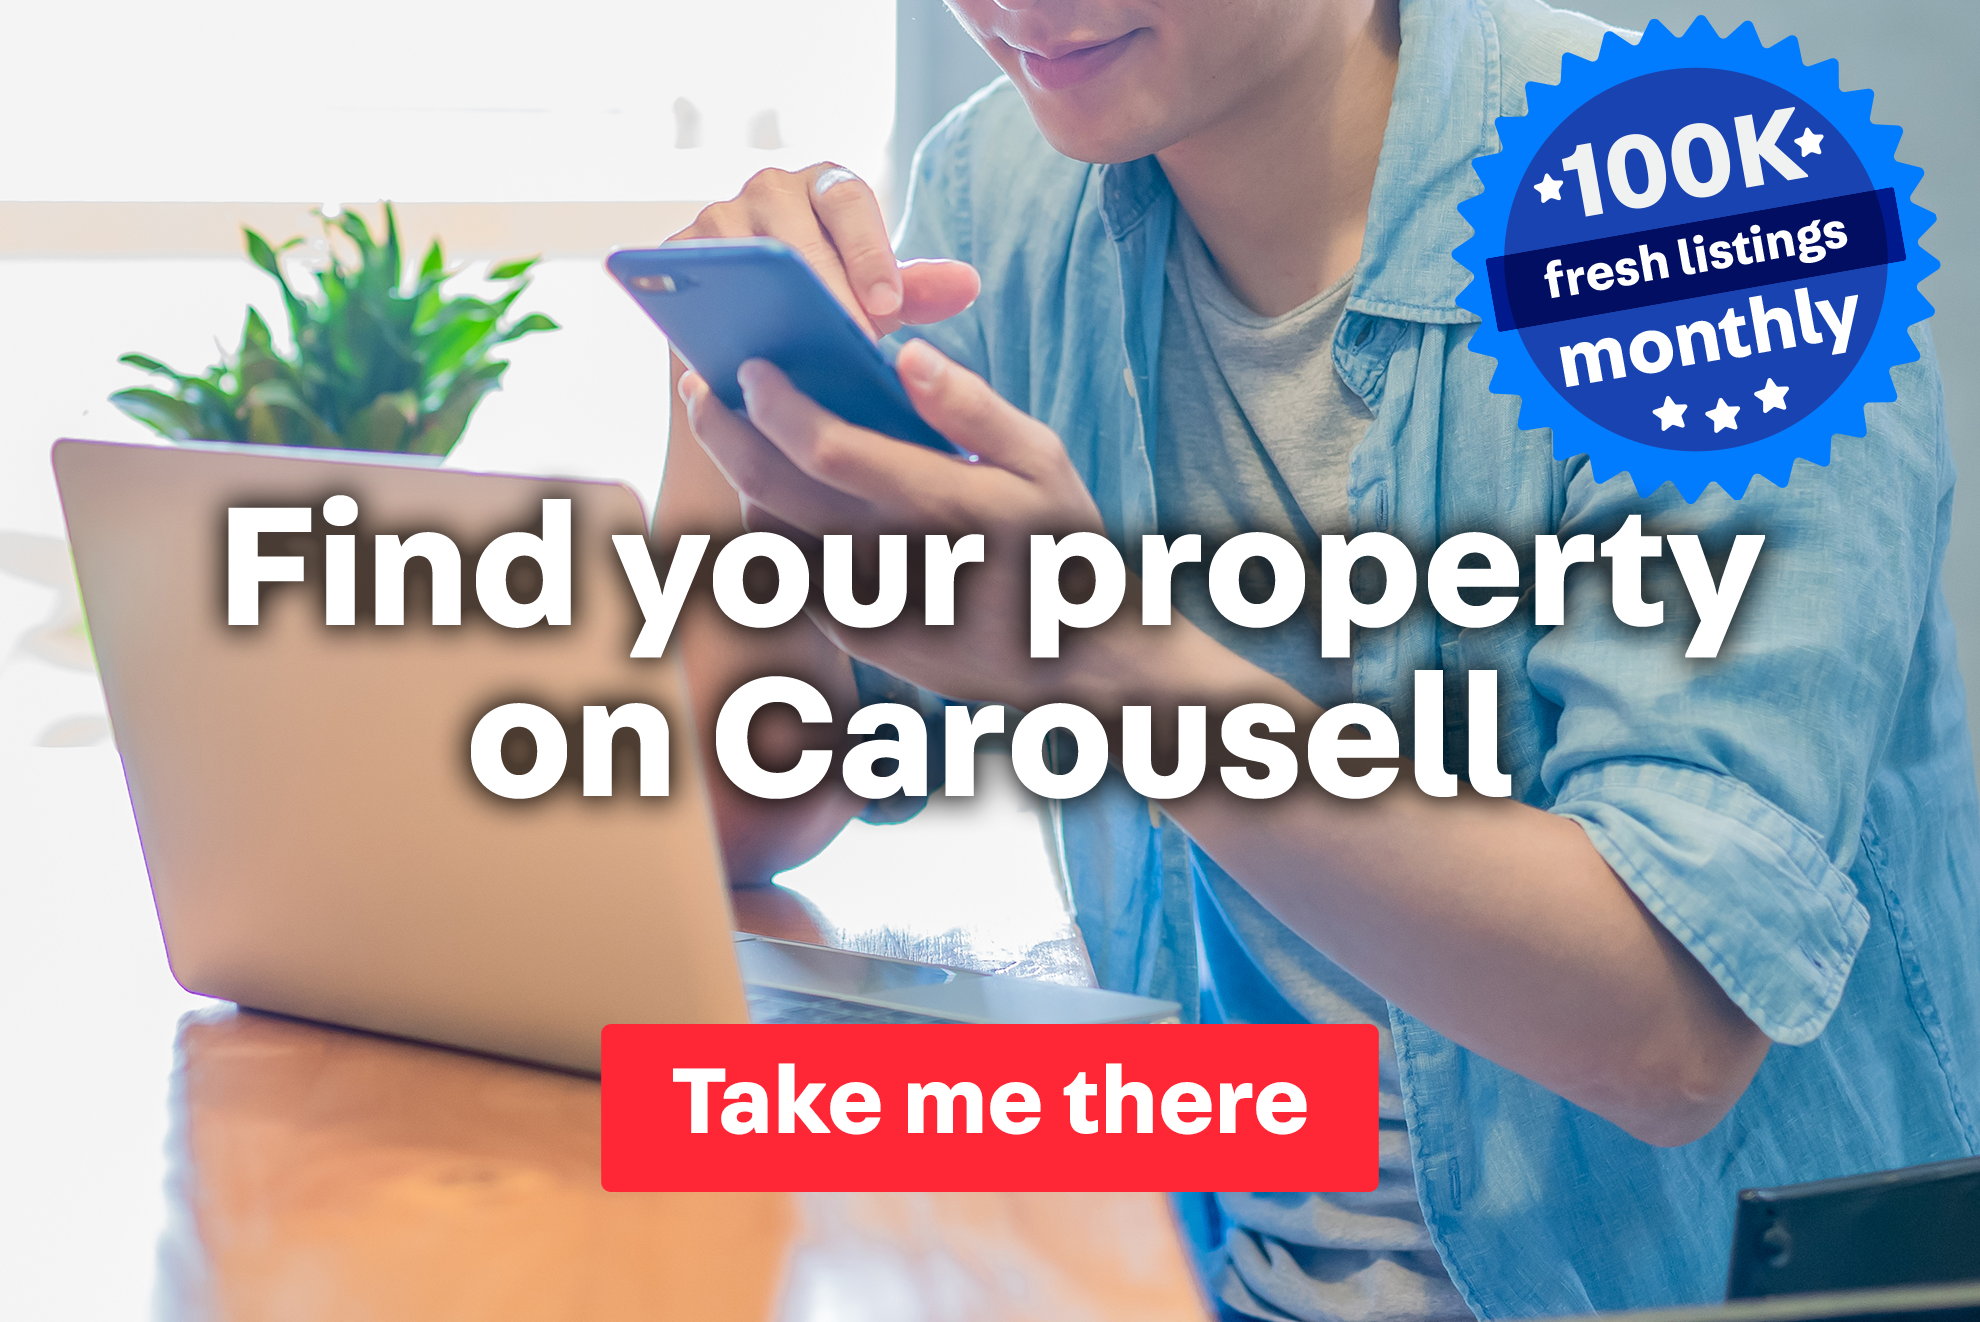 Find your property on Carousell